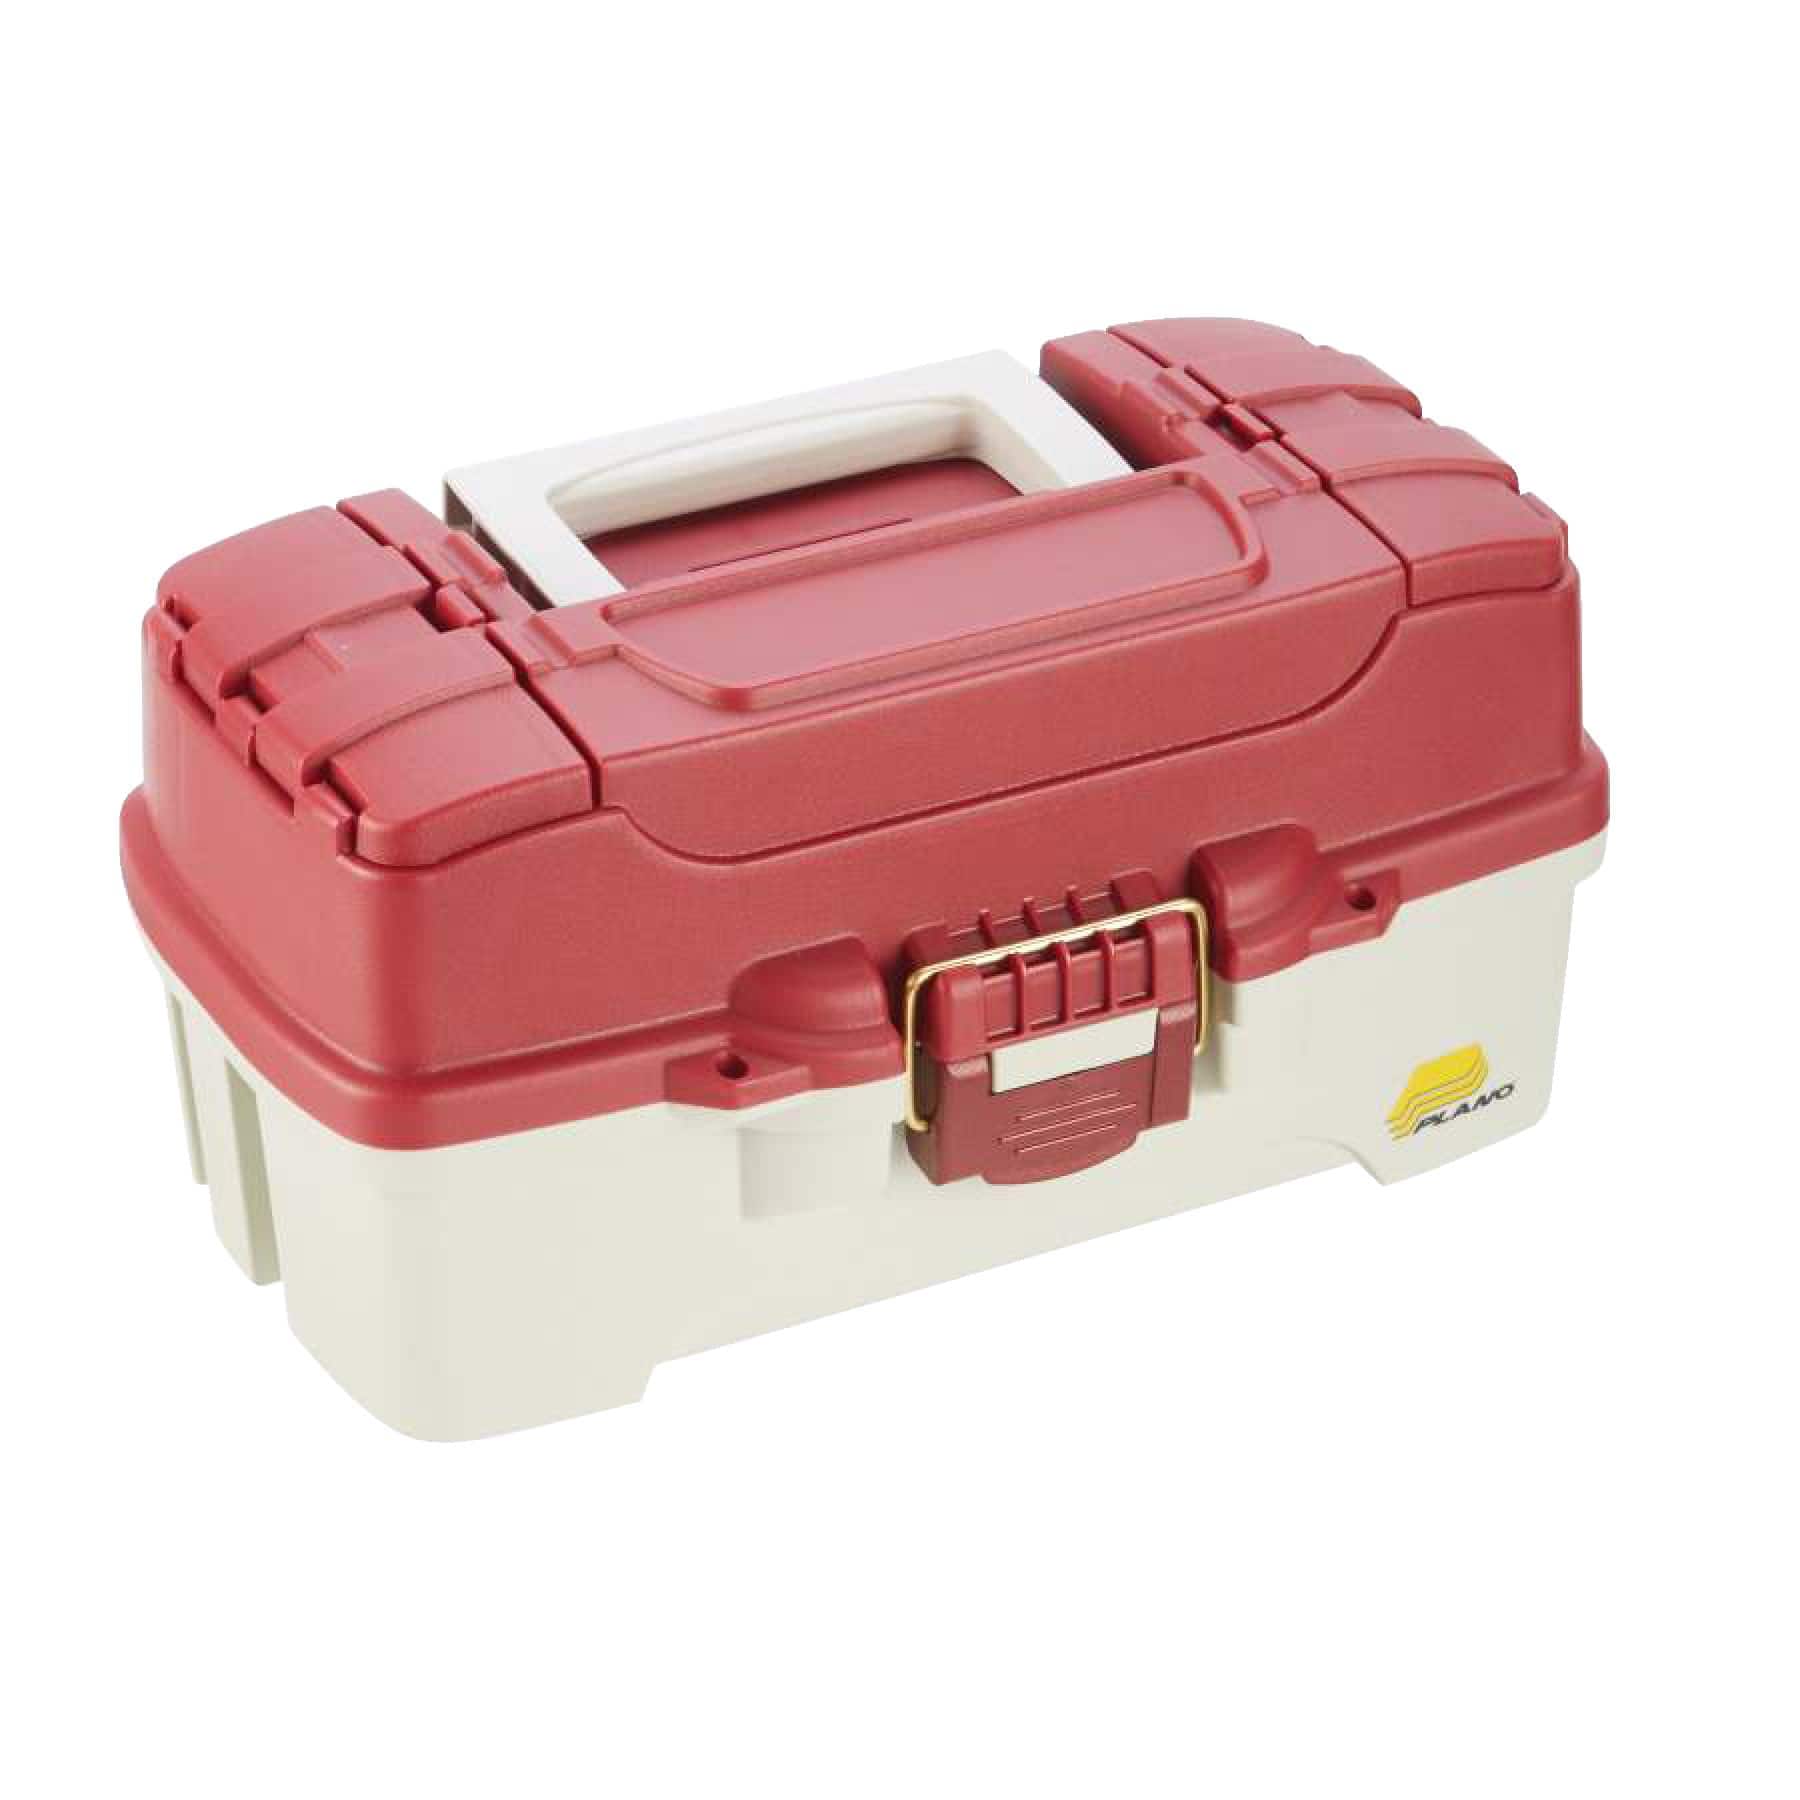 Plano Model Products Clear Plastic Fishing Tackle Boxes & Bags for